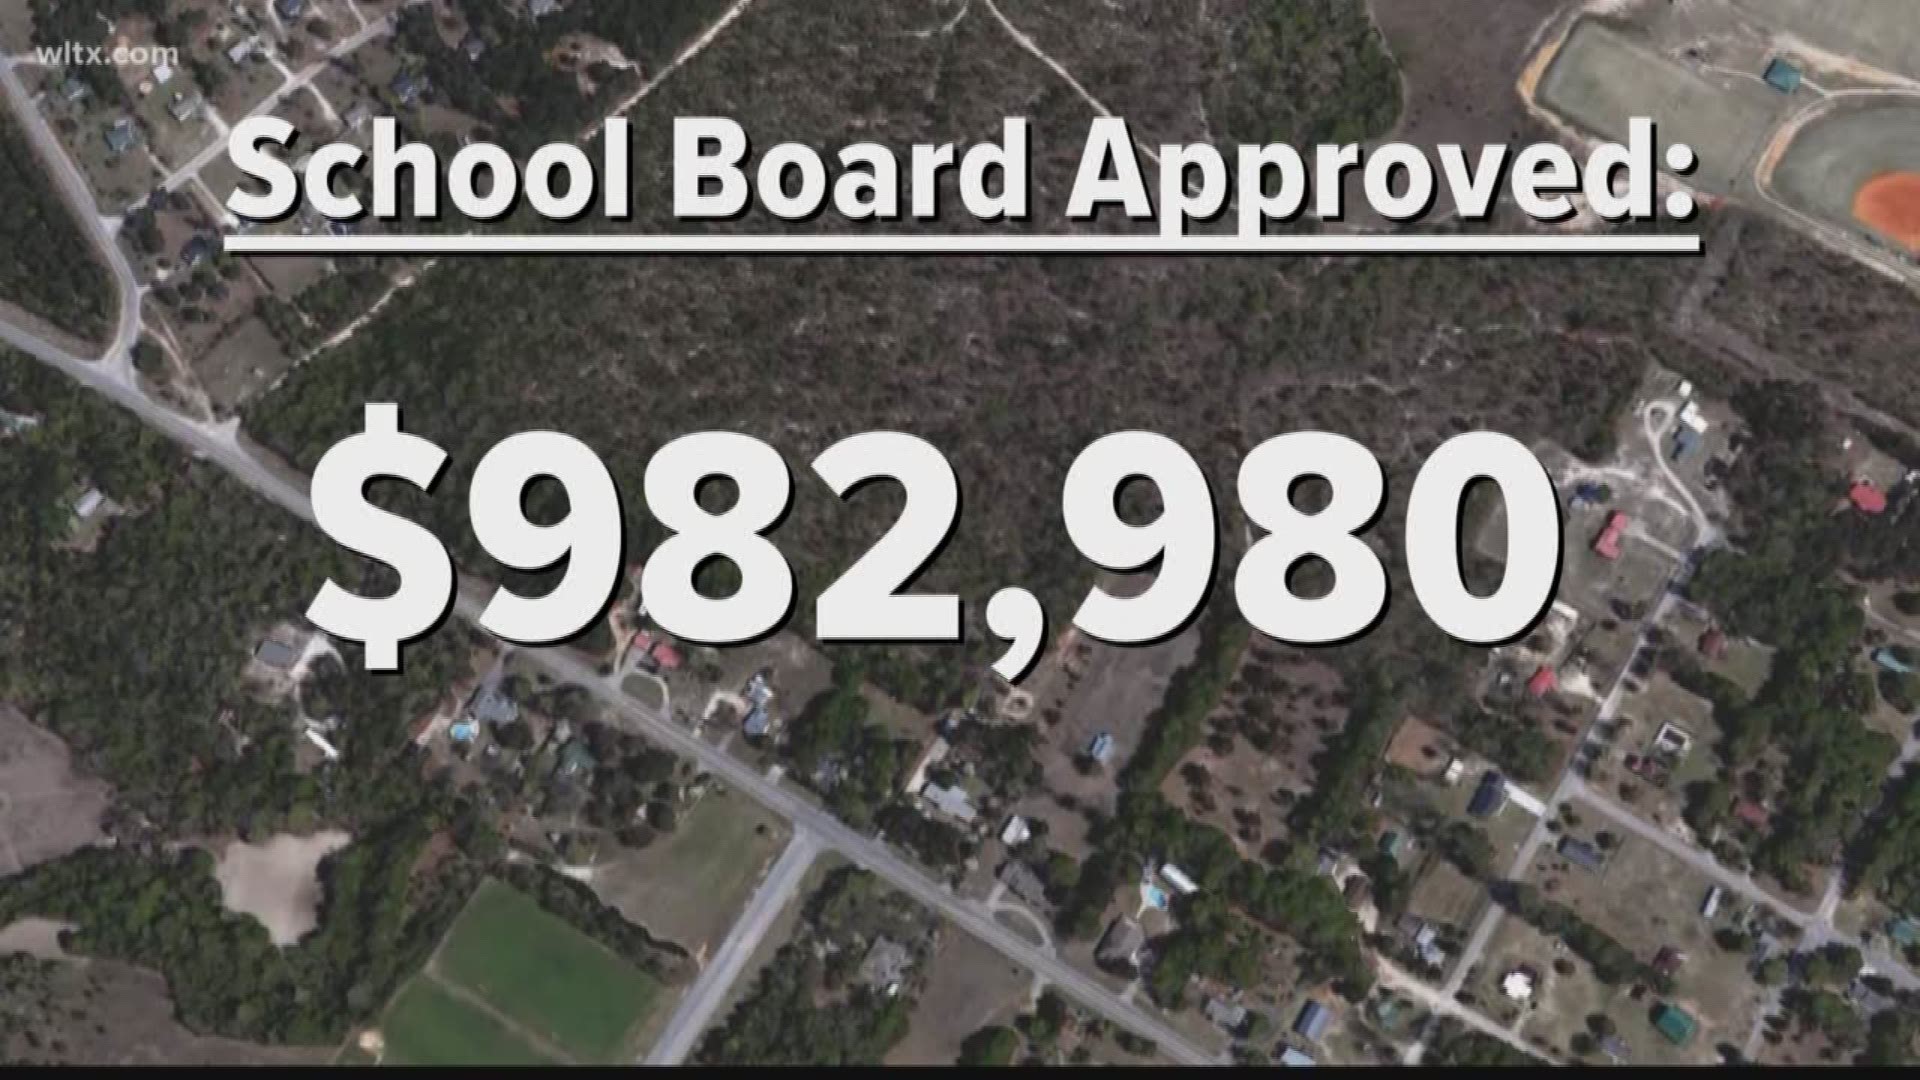 A Lexington County School District is catching a lot of heat for a new purchase of land they recenlty made.	That's because they paid more than 6 times the amount...the land is worth.